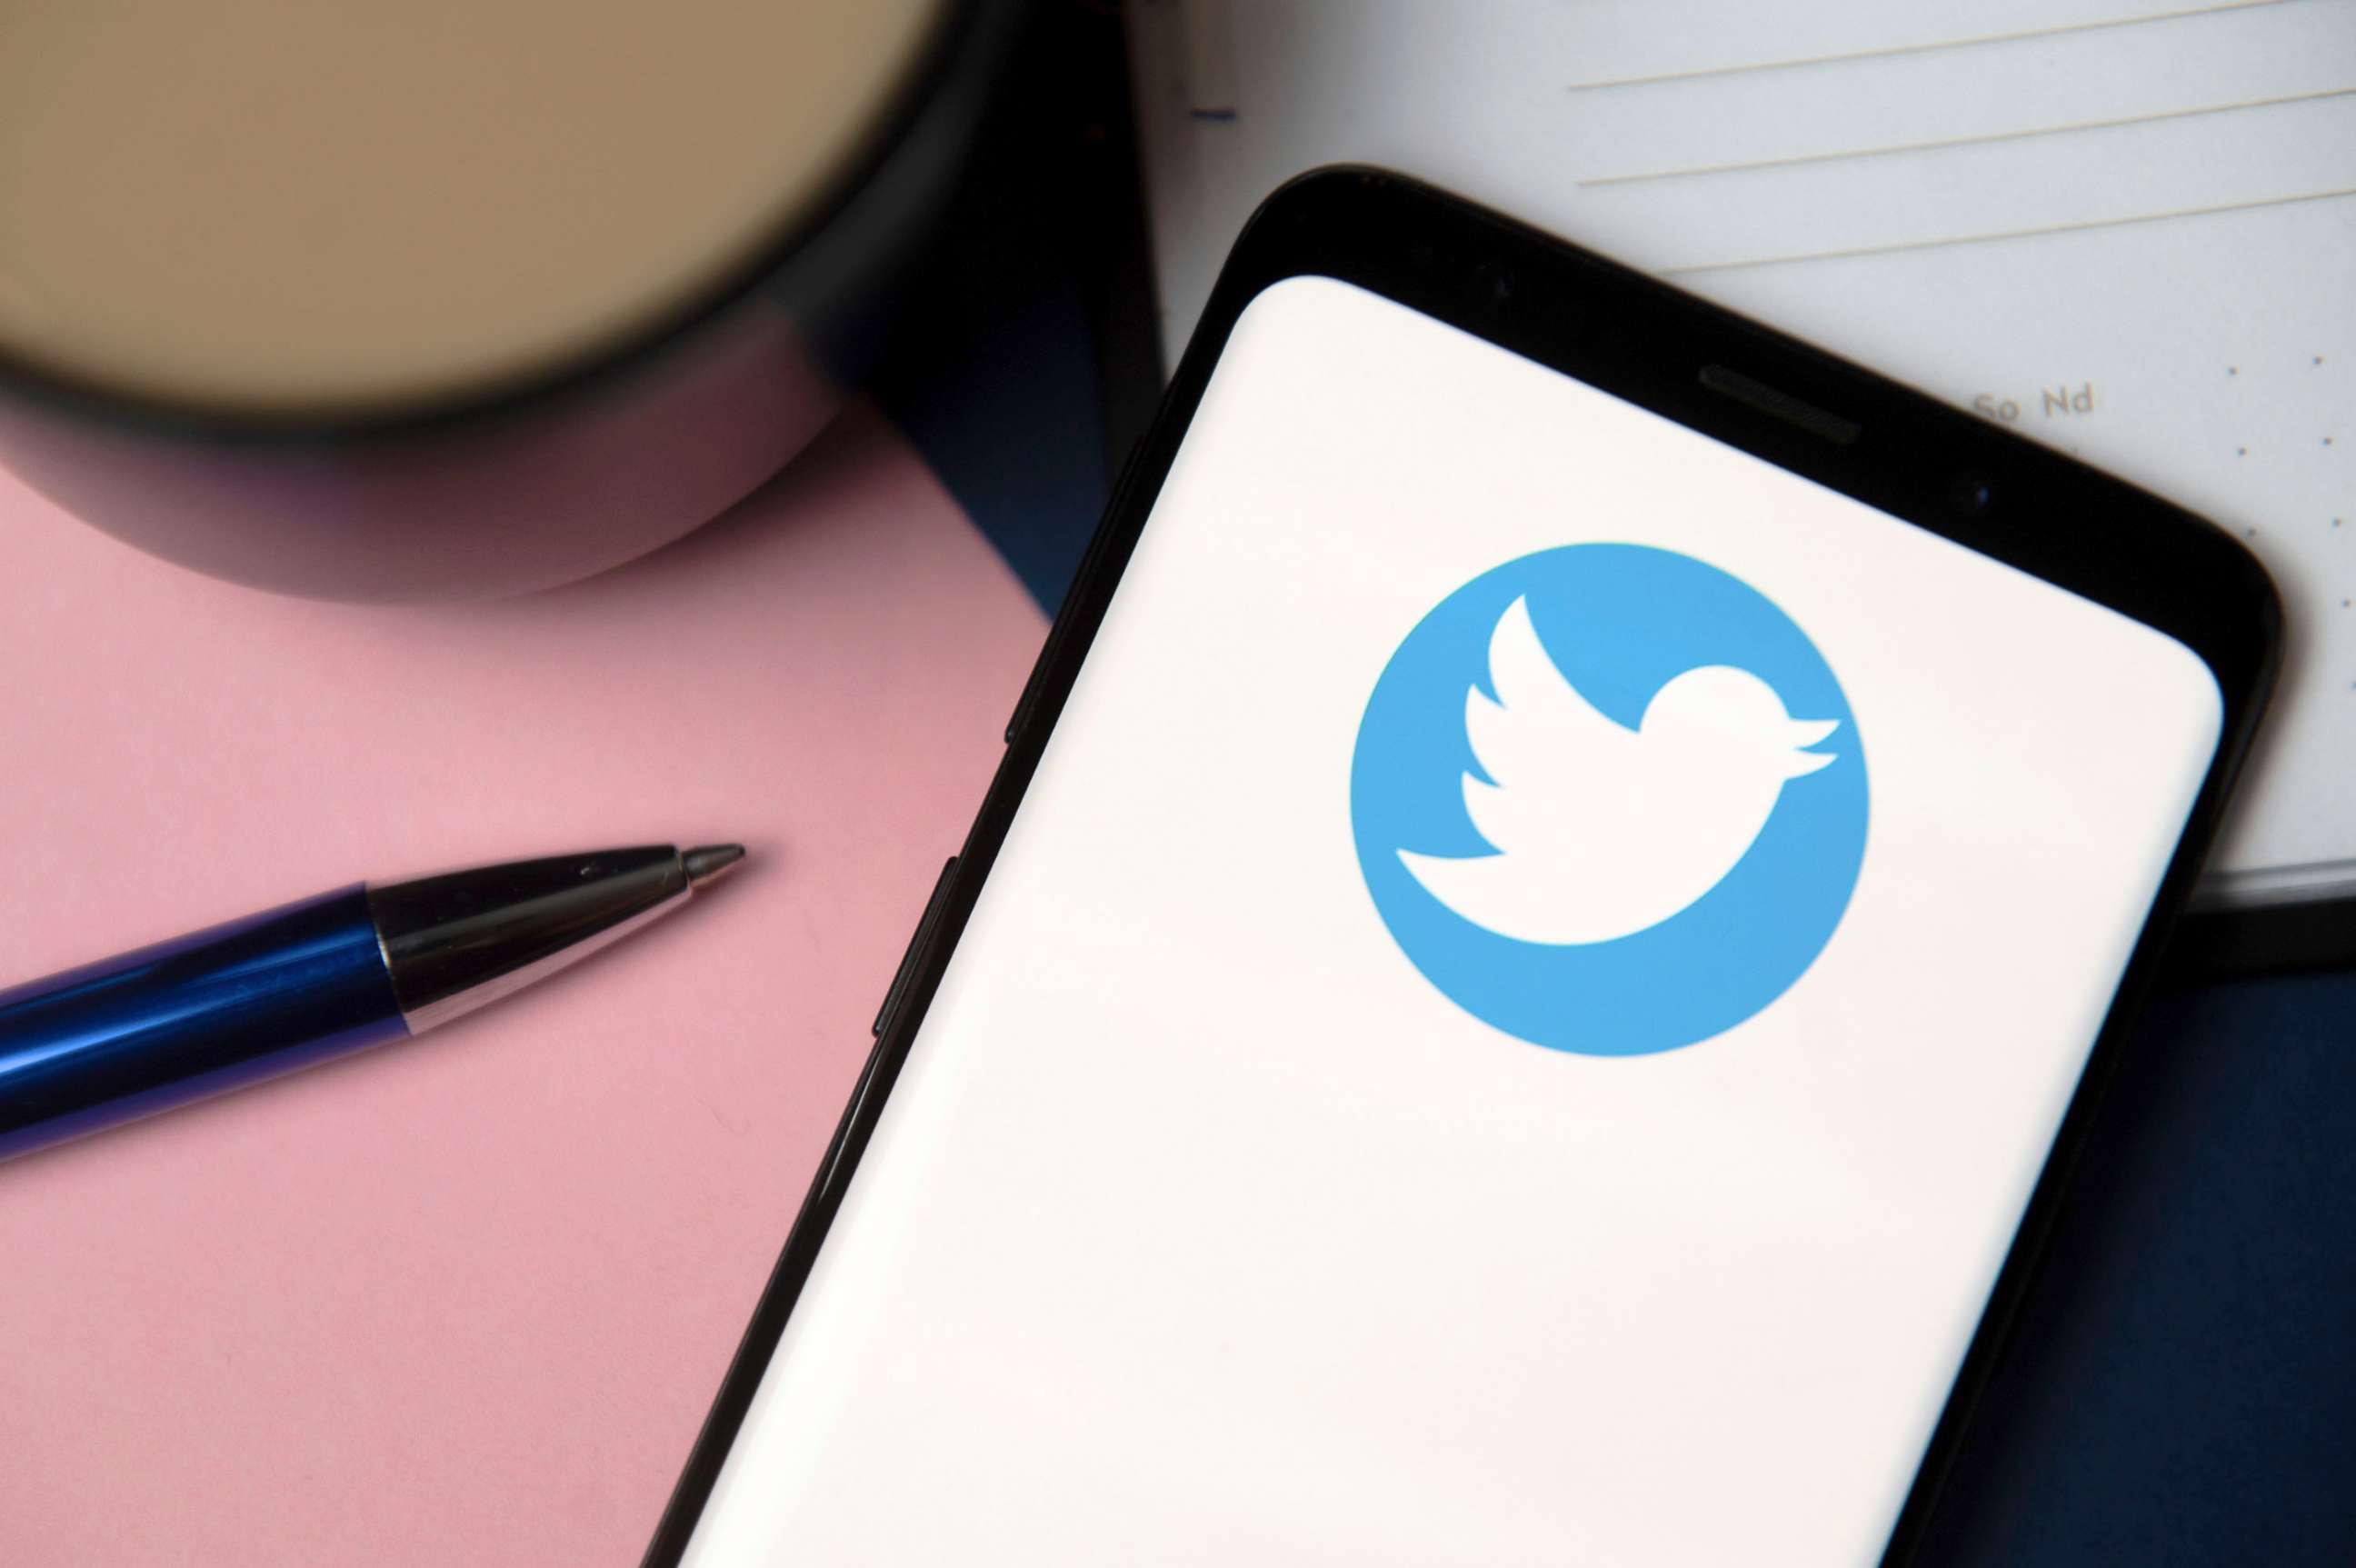 PHOTO: A Twitter logo displayed on a smartphone in an undated stock image.